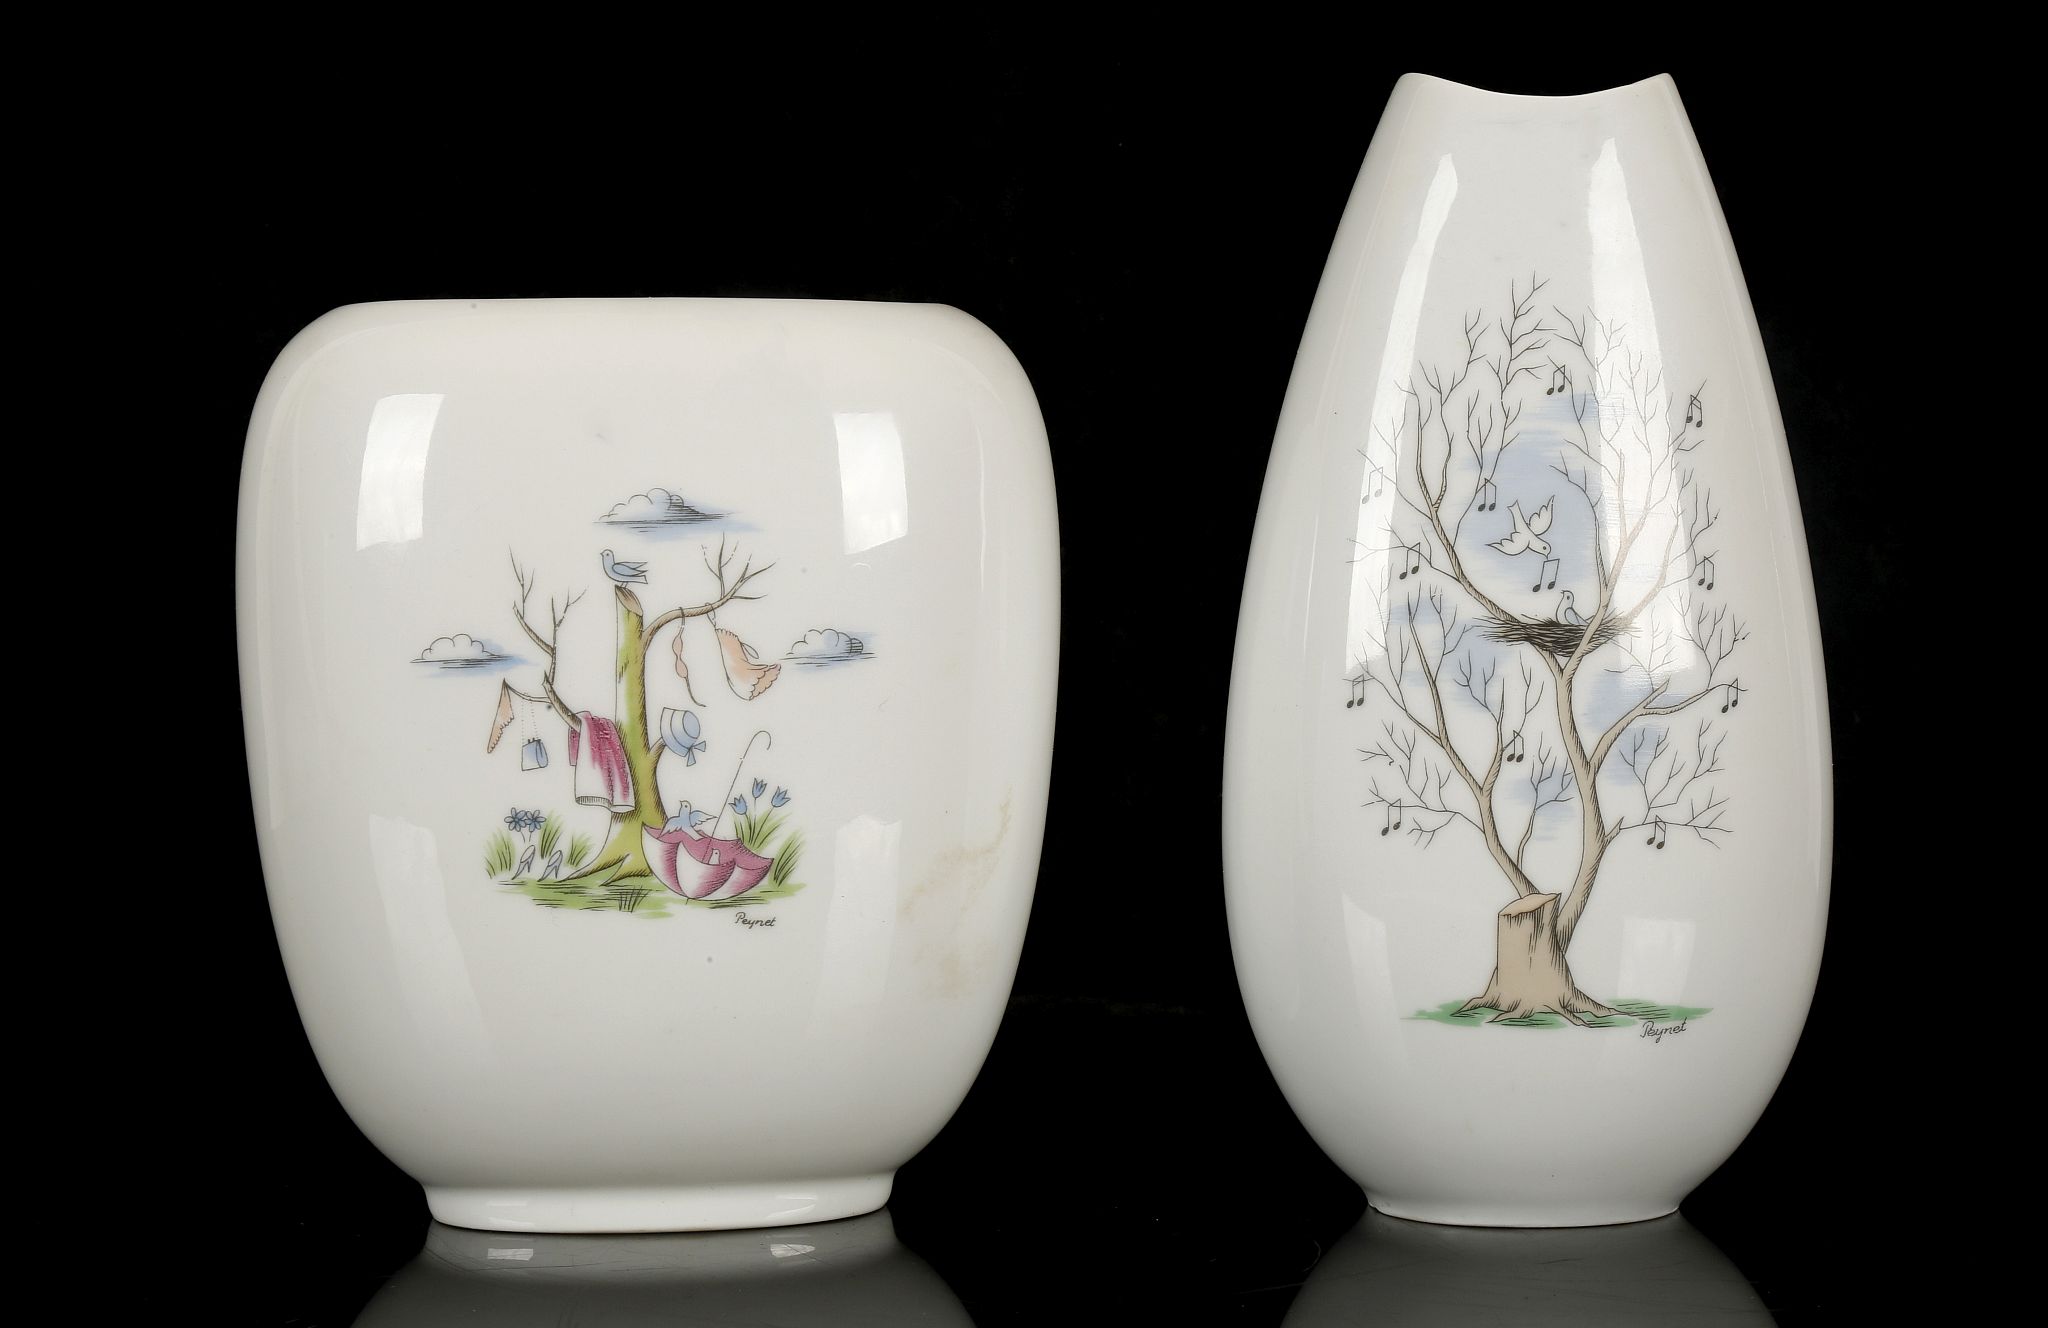 ROSENTHAL GERMANY, two 1960's porcelain vases decorated with designs by Raymond Peynet, stamped with